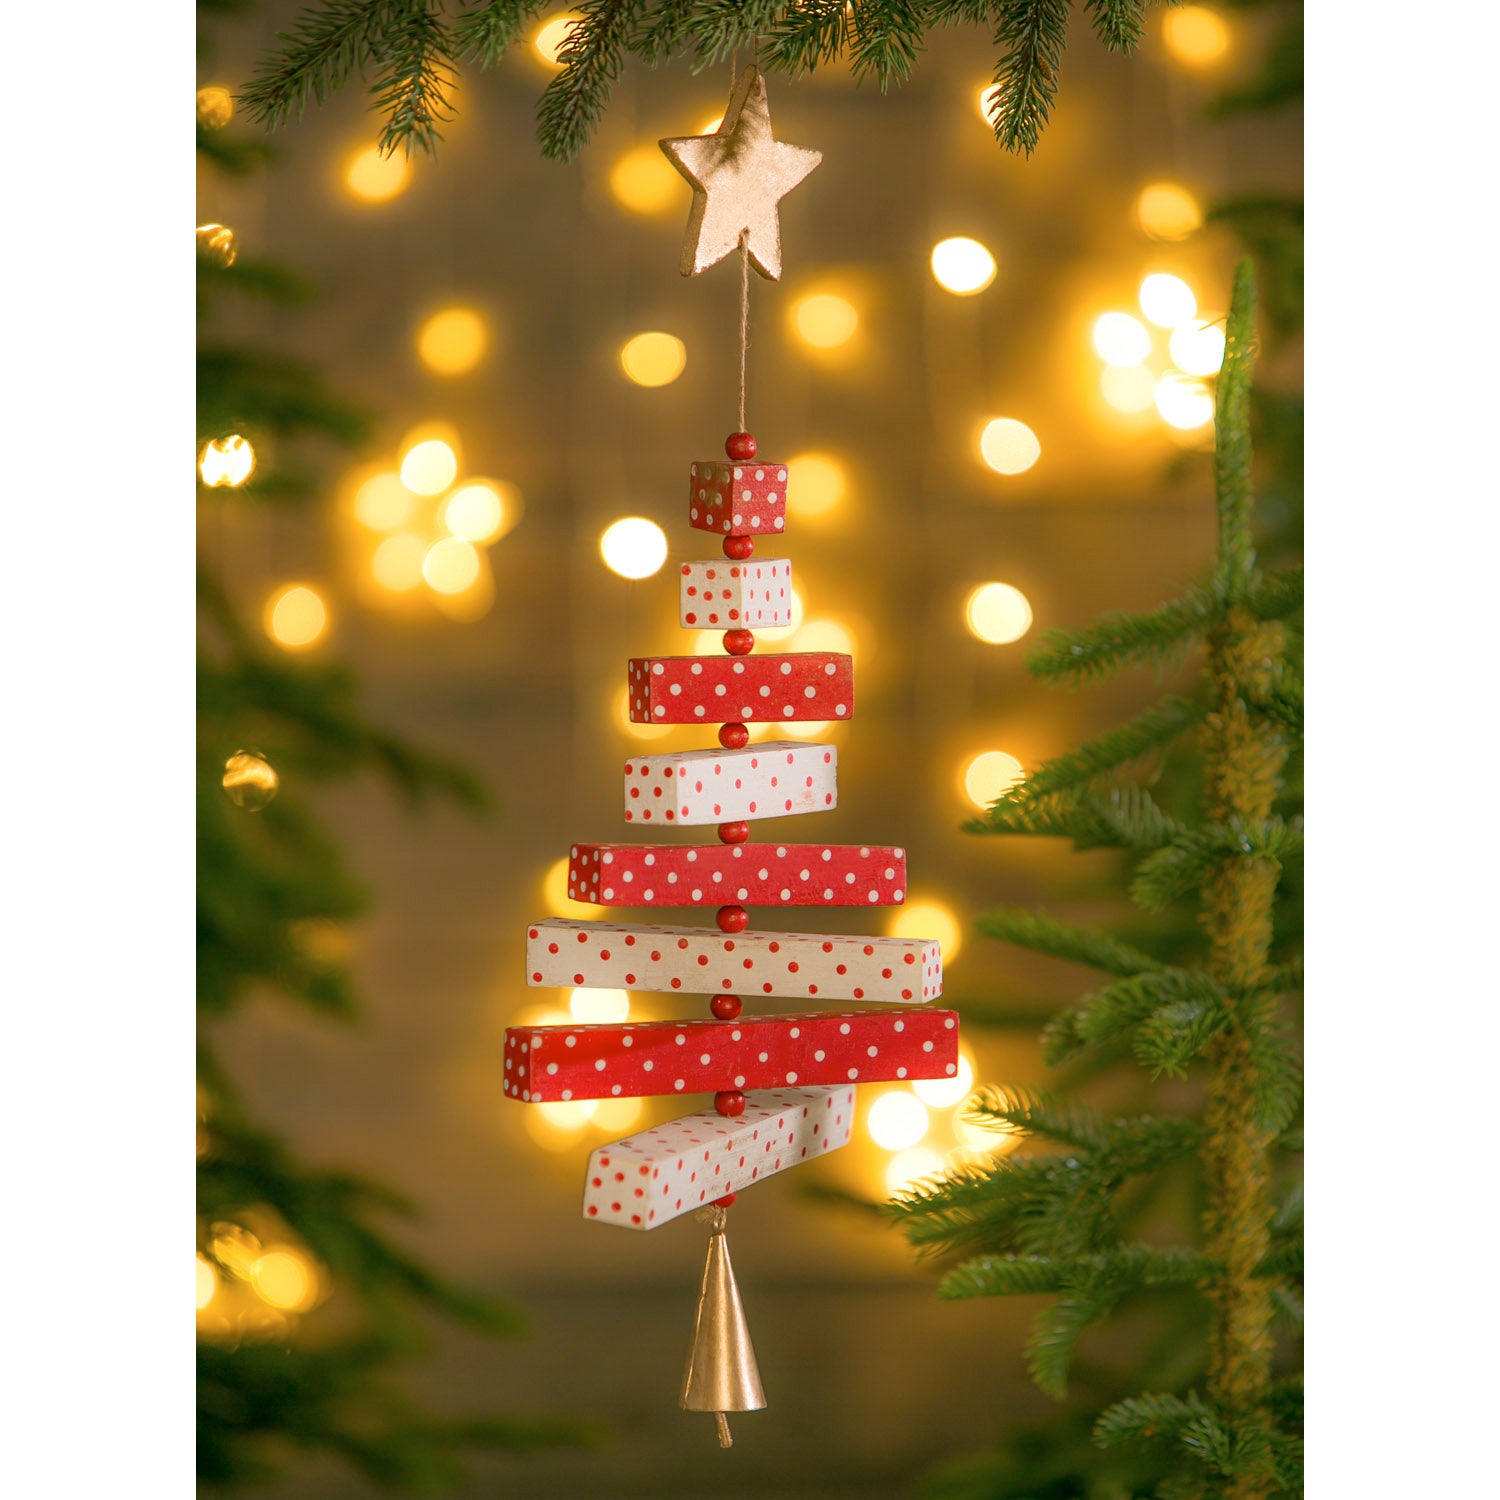 Red and White Polka Dot Stacked Wood Christmas Tree Ornament